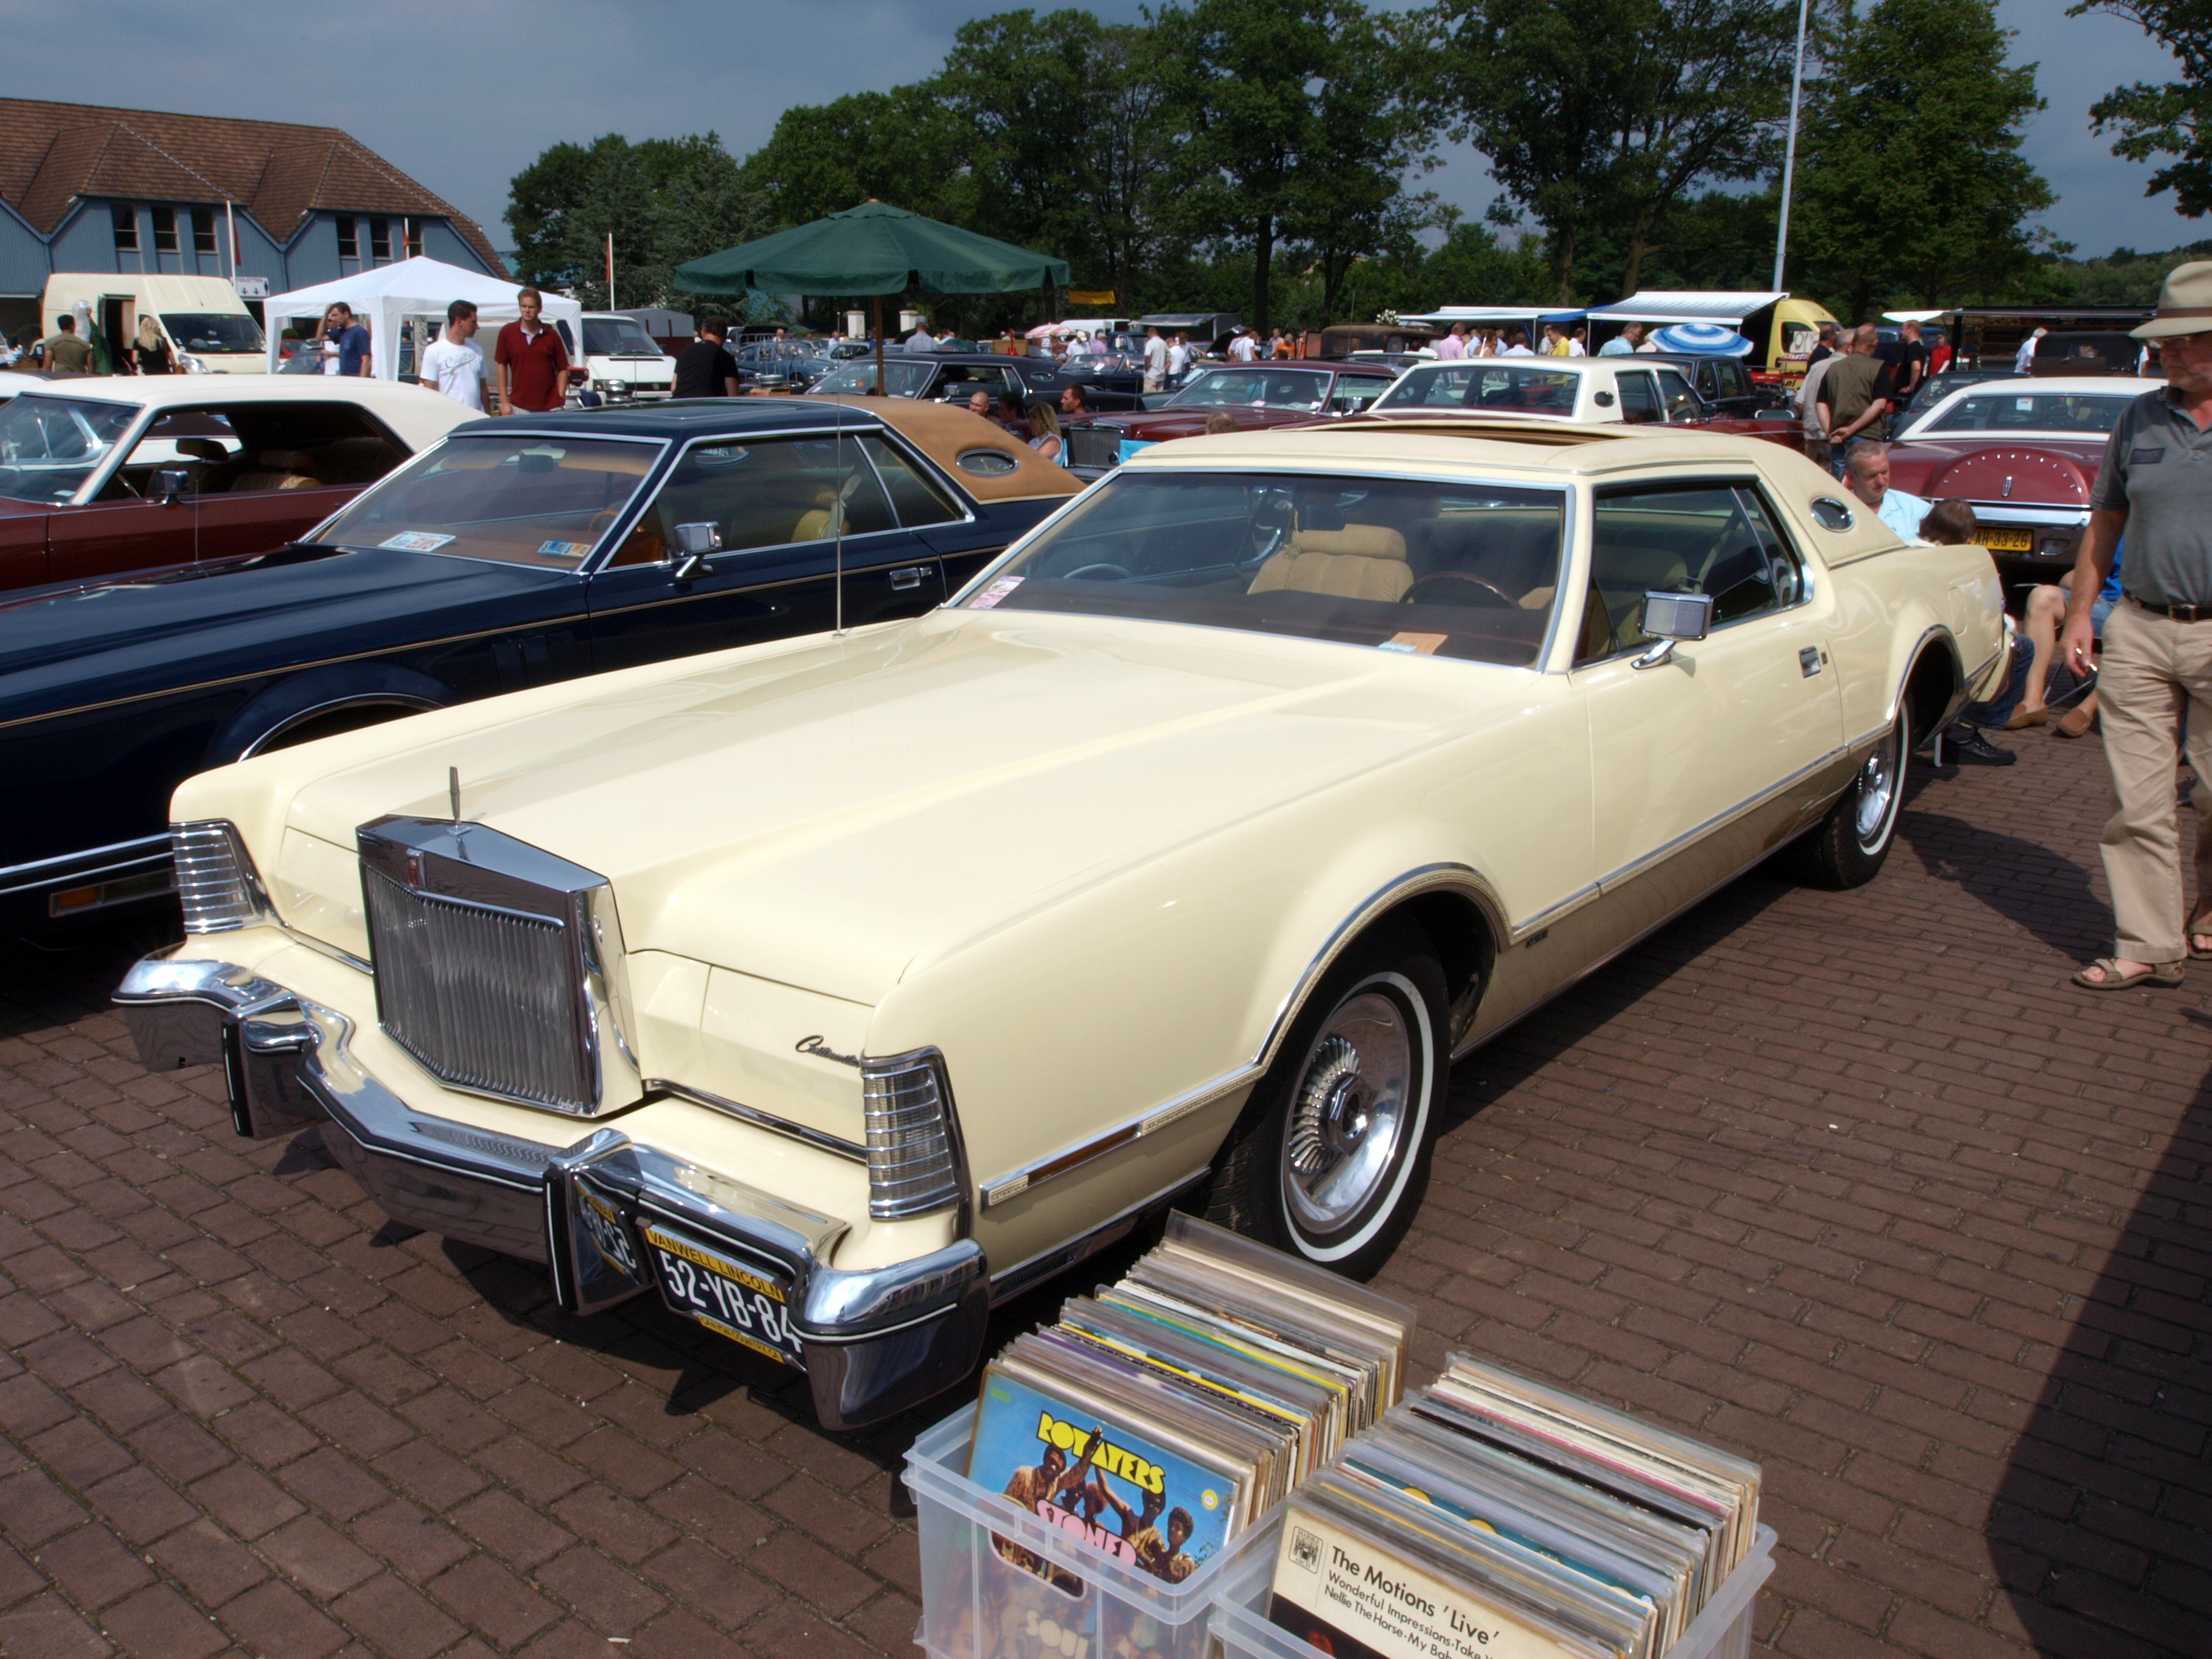 1976 Lincoln Continental Mark IV Backgrounds, Compatible - PC, Mobile, Gadgets| 3648x2736 px